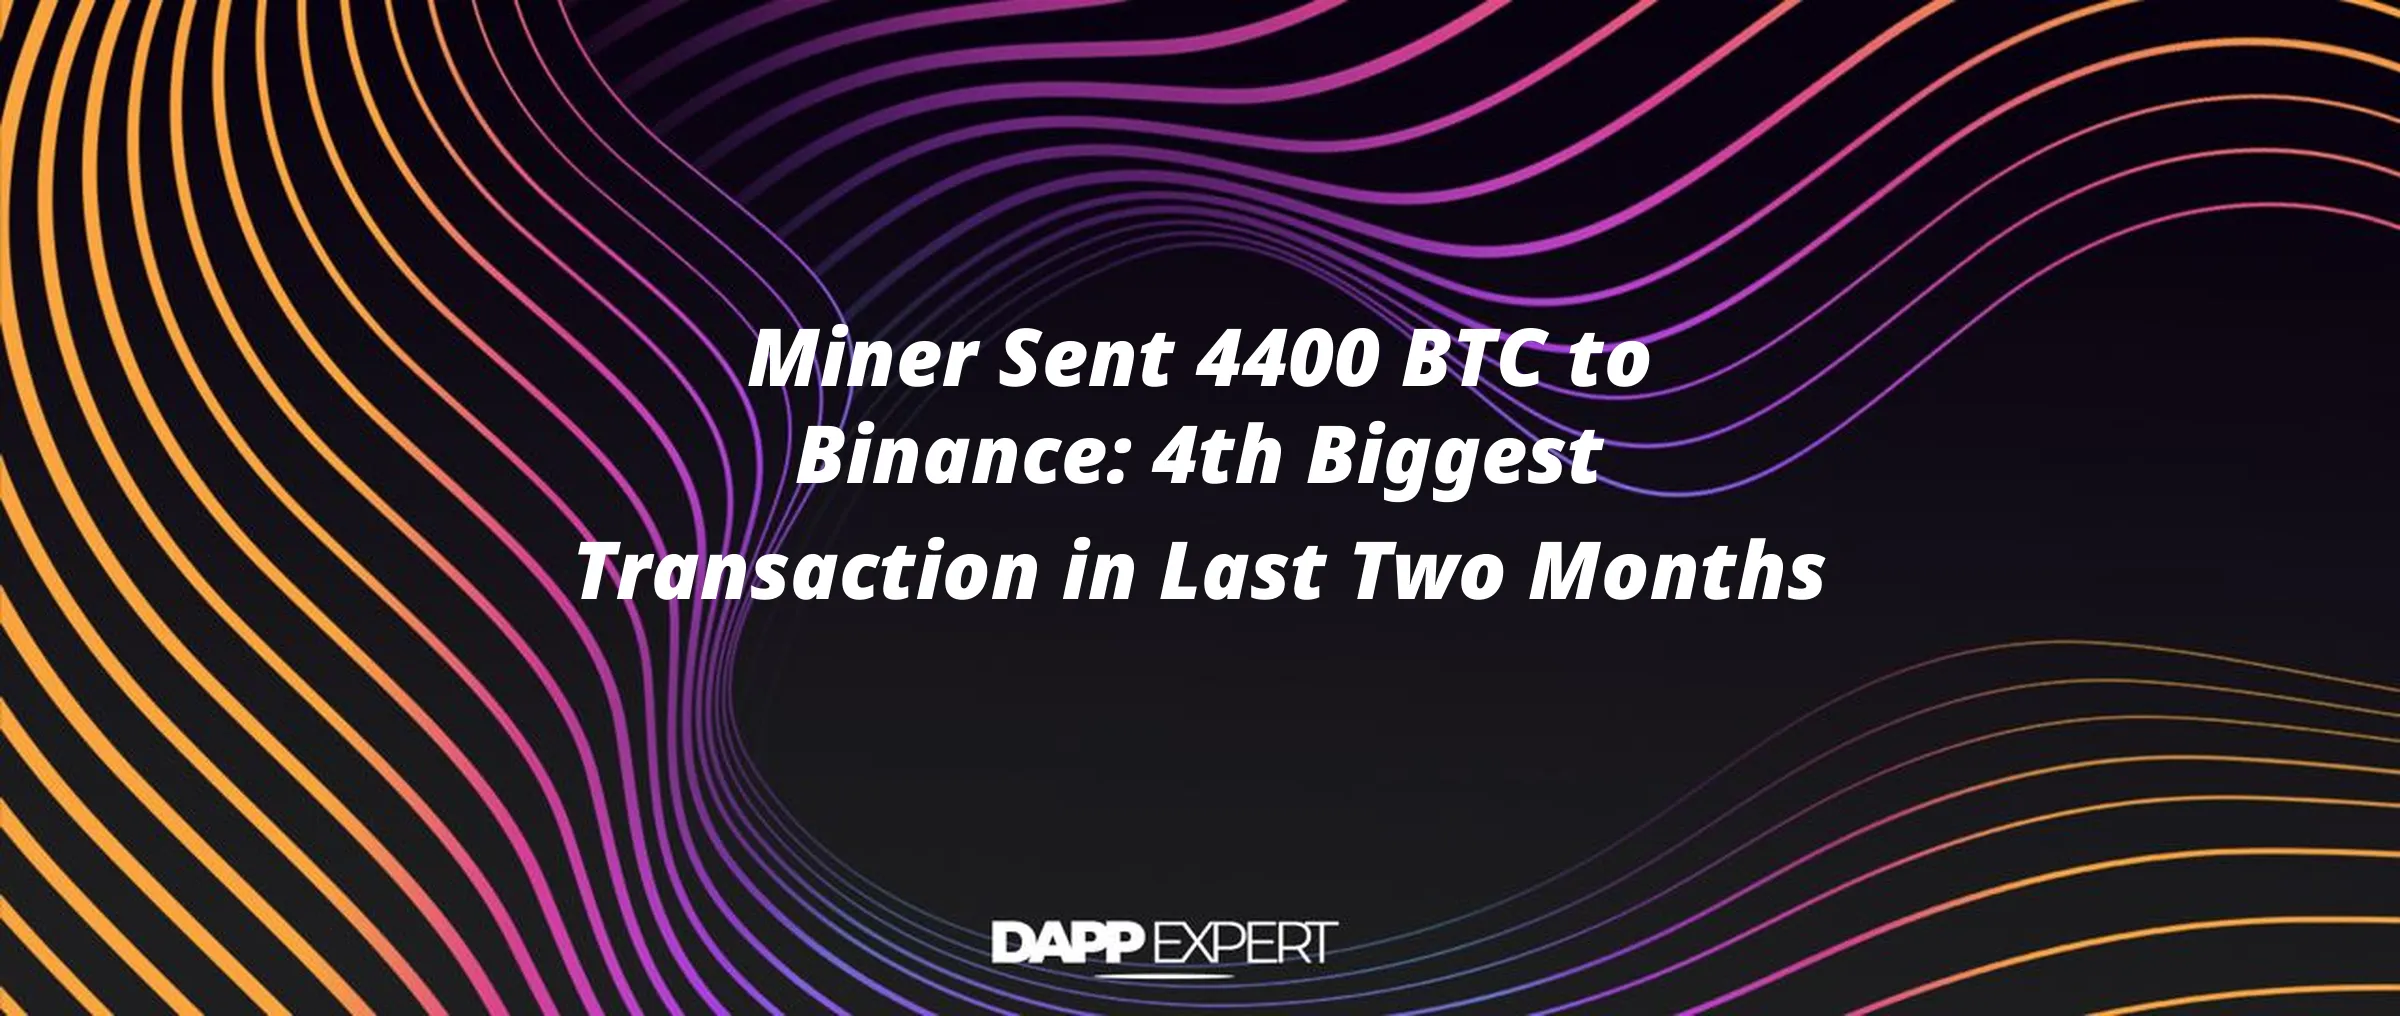 Miner Sent 4400 BTC to Binance: 4th Biggest Transaction in Last Two Months